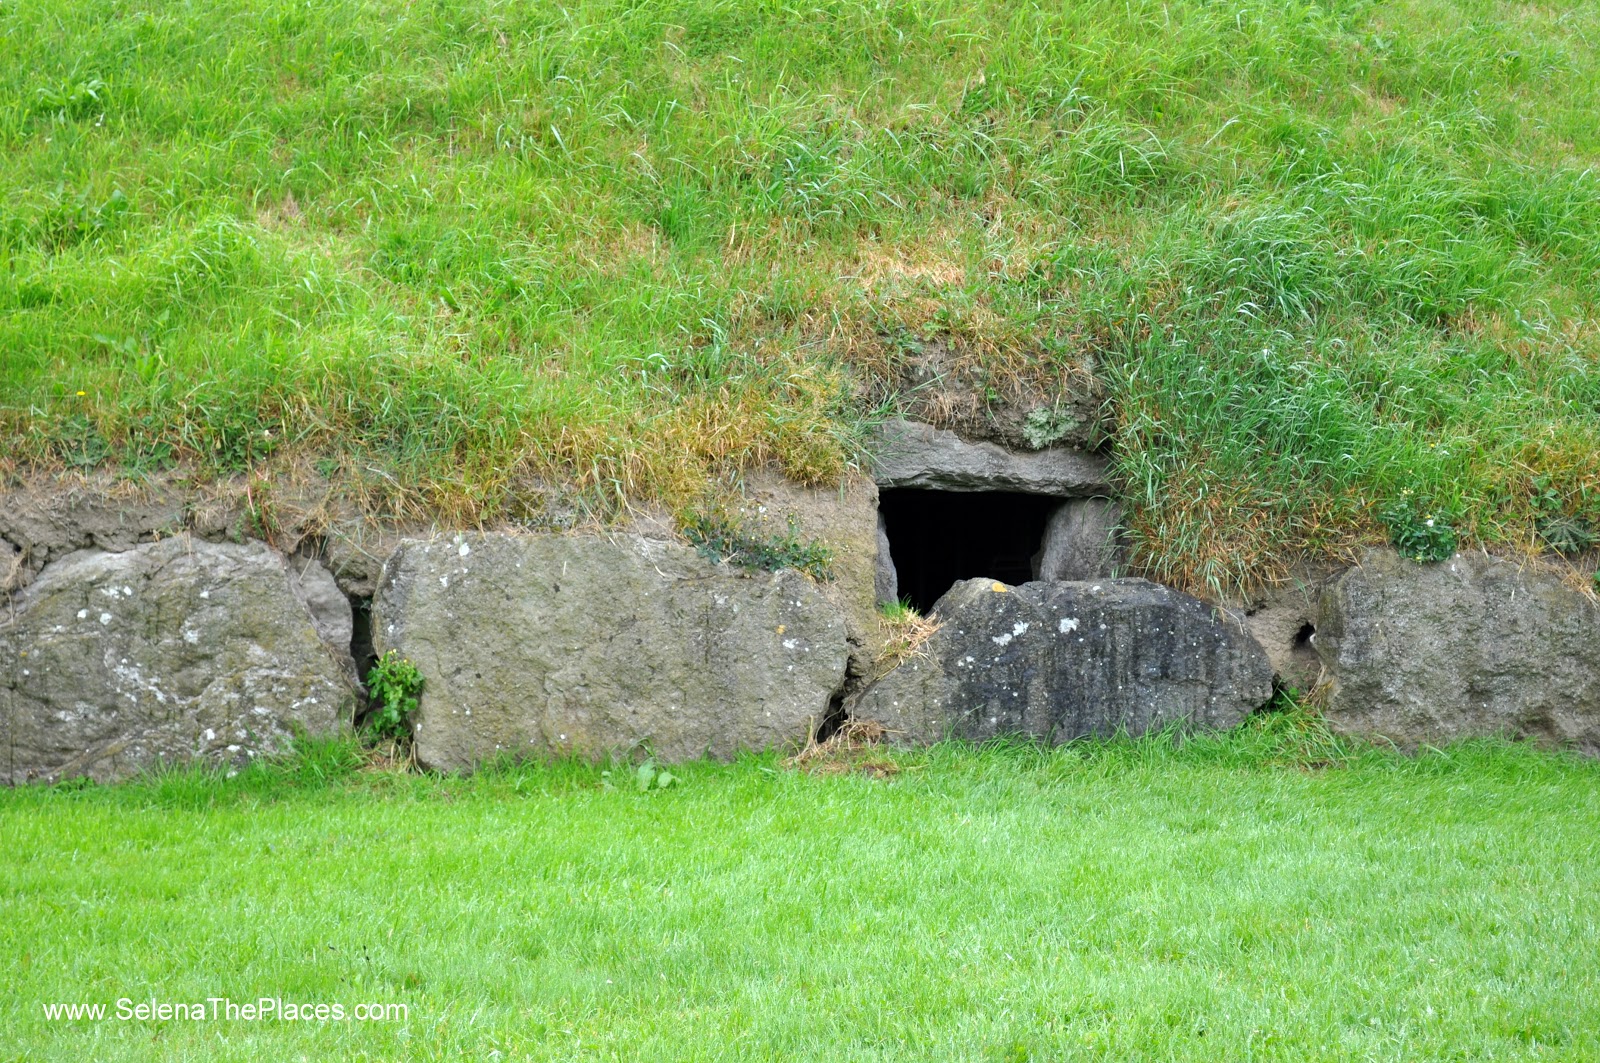 The Great Mound at Knowth, Ireland